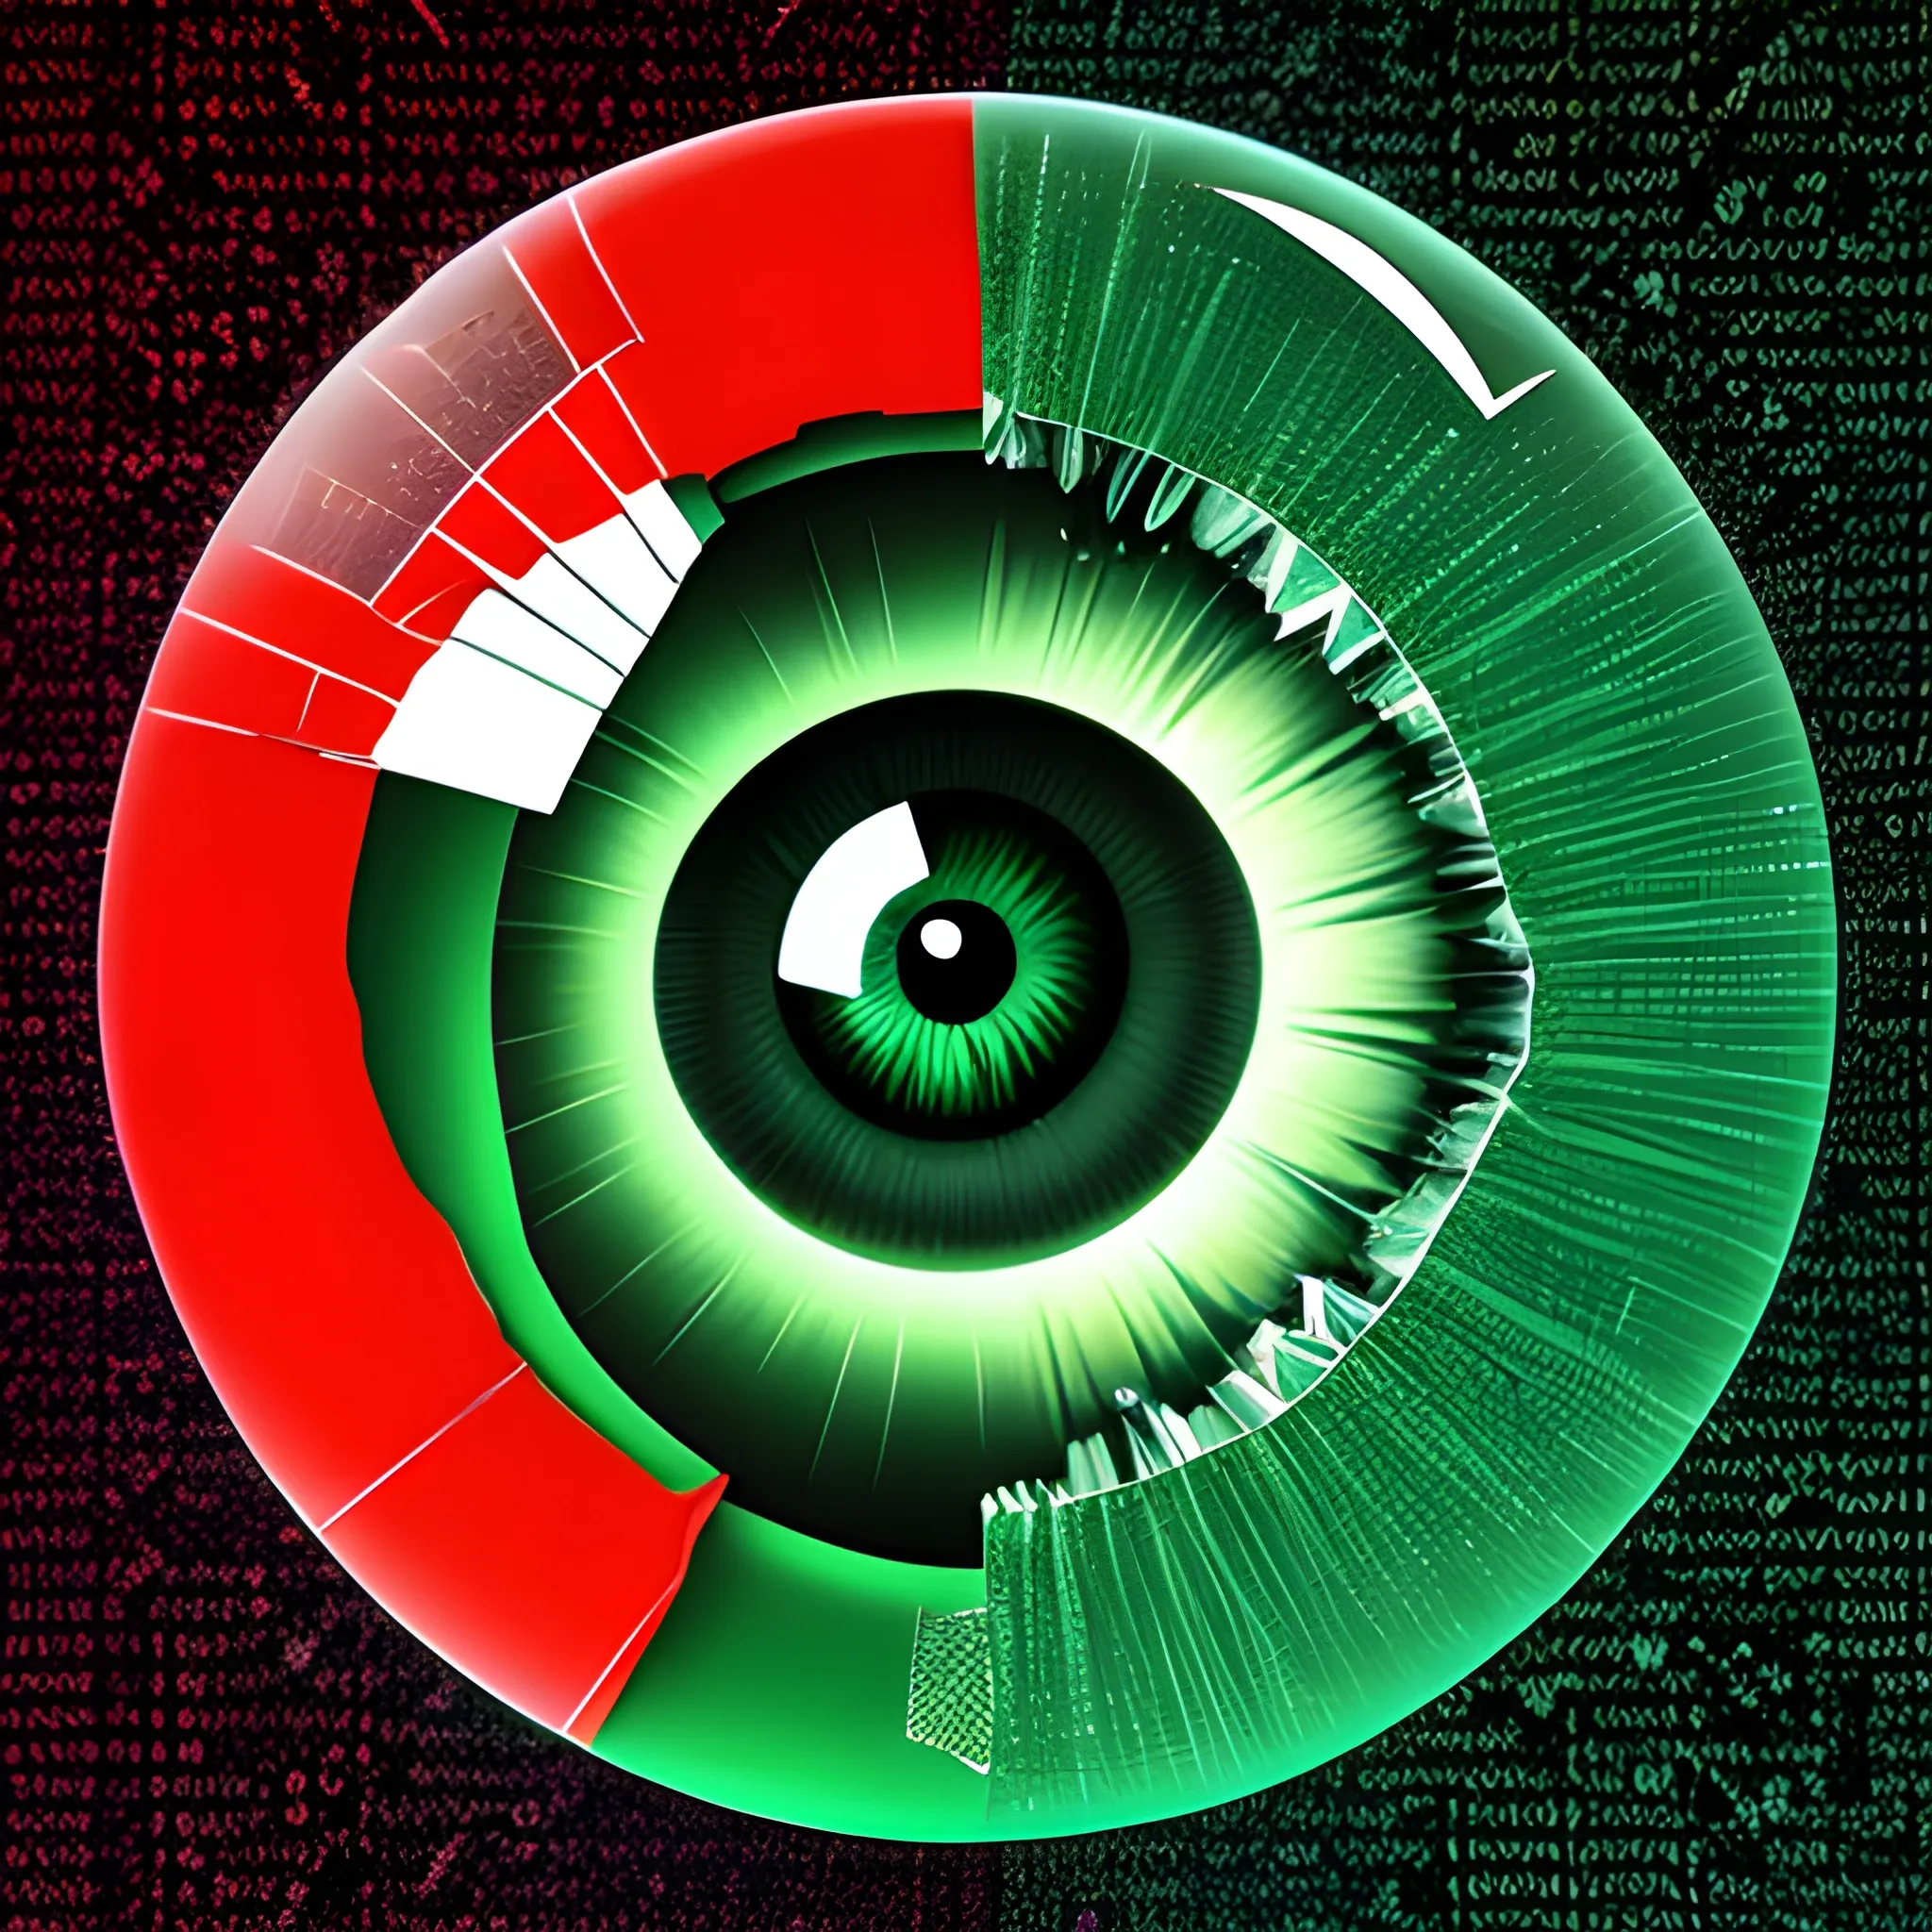 Breakthrough, eye, deep, far away, profile view, illusion, shattered glass, hacker, coding, offensive security, red and green, malware, round shape, 3D, cyber security, rootkit, computer, broken glass